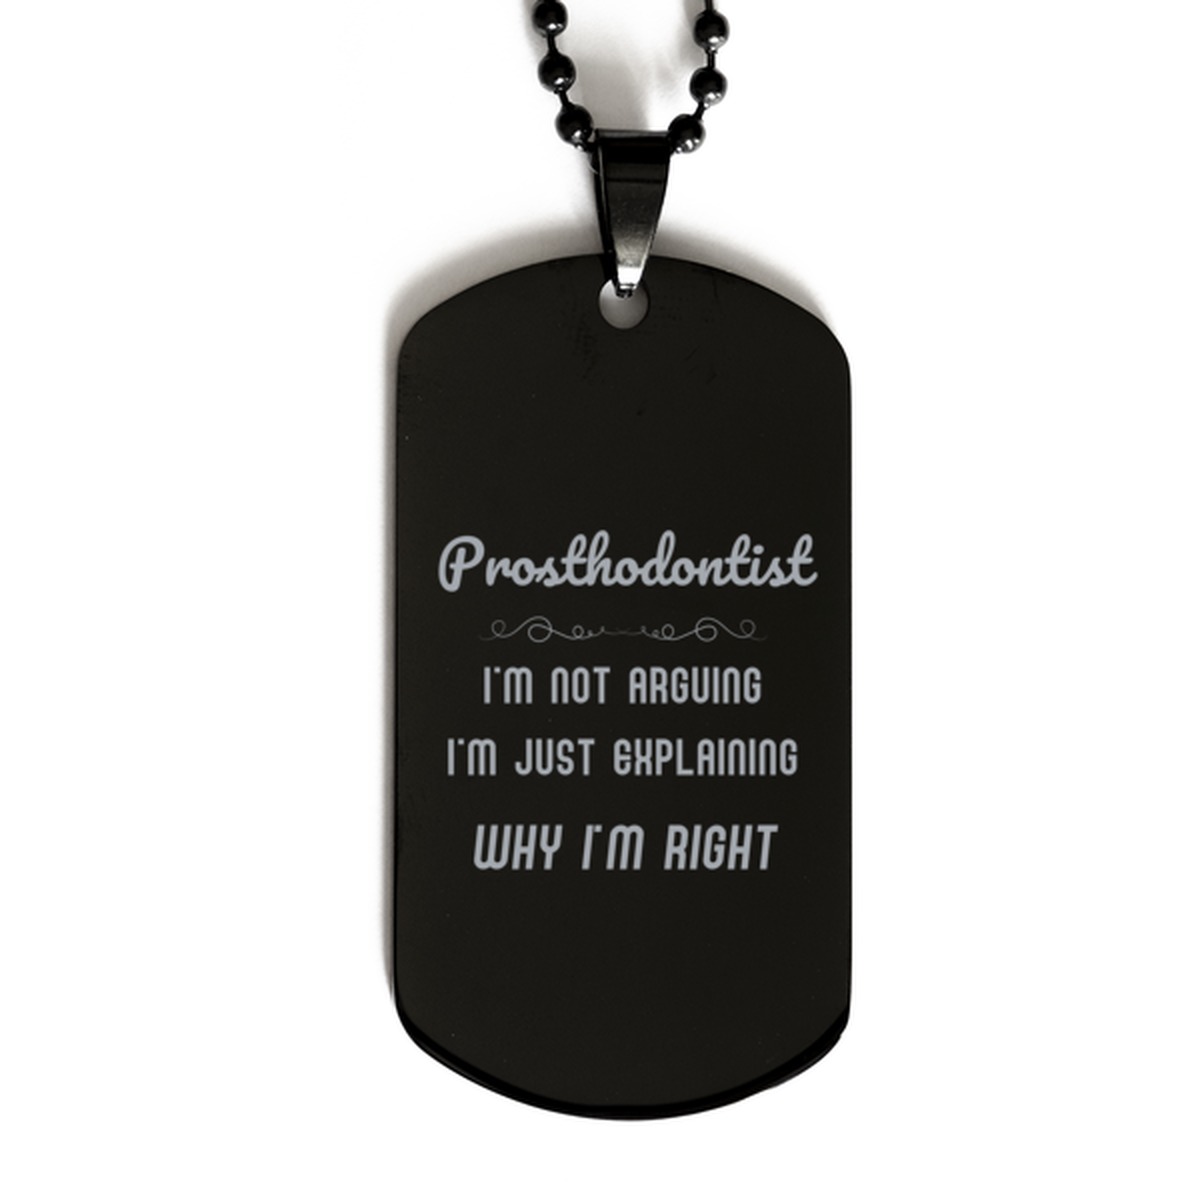 Prosthodontist I'm not Arguing. I'm Just Explaining Why I'm RIGHT Black Dog Tag, Funny Saying Quote Prosthodontist Gifts For Prosthodontist Graduation Birthday Christmas Gifts for Men Women Coworker